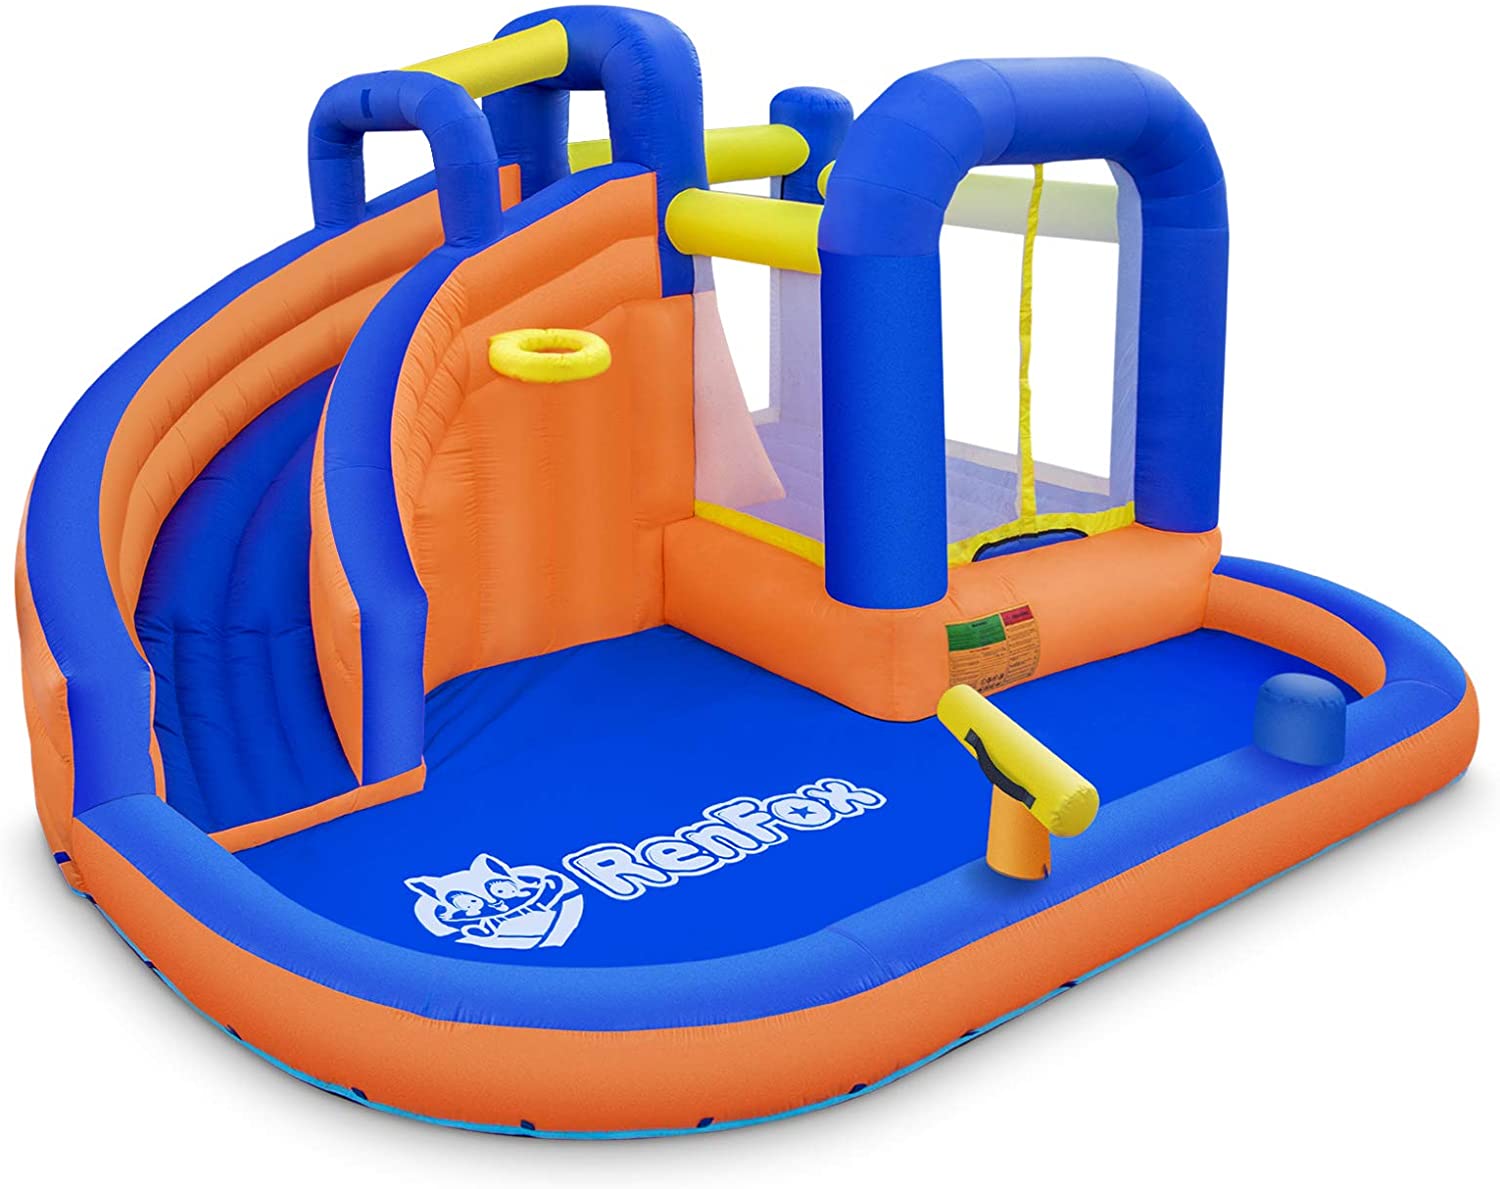 RenFox Inflatable Waterslide, Extra Thick Water Bounce Hose with Blower, Backyard Playsets for Kids with Long Slide, Basketball Hoop and Climbing Wall, Kids